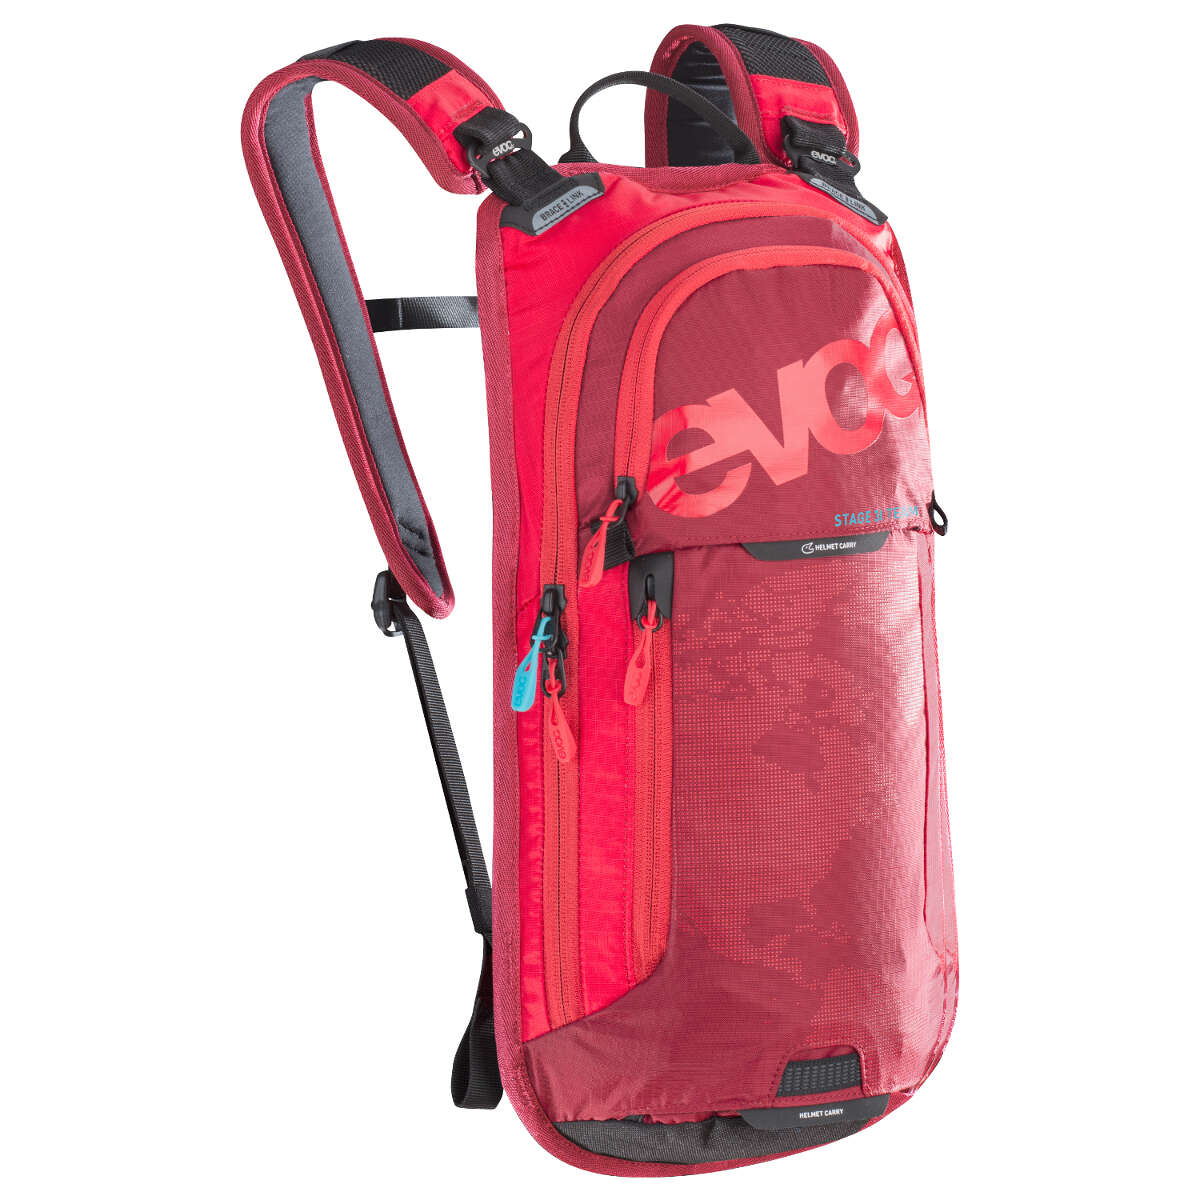 Evoc Backpack with Hydration System Compartment Stage Team Red-Ruby, 3 Liter